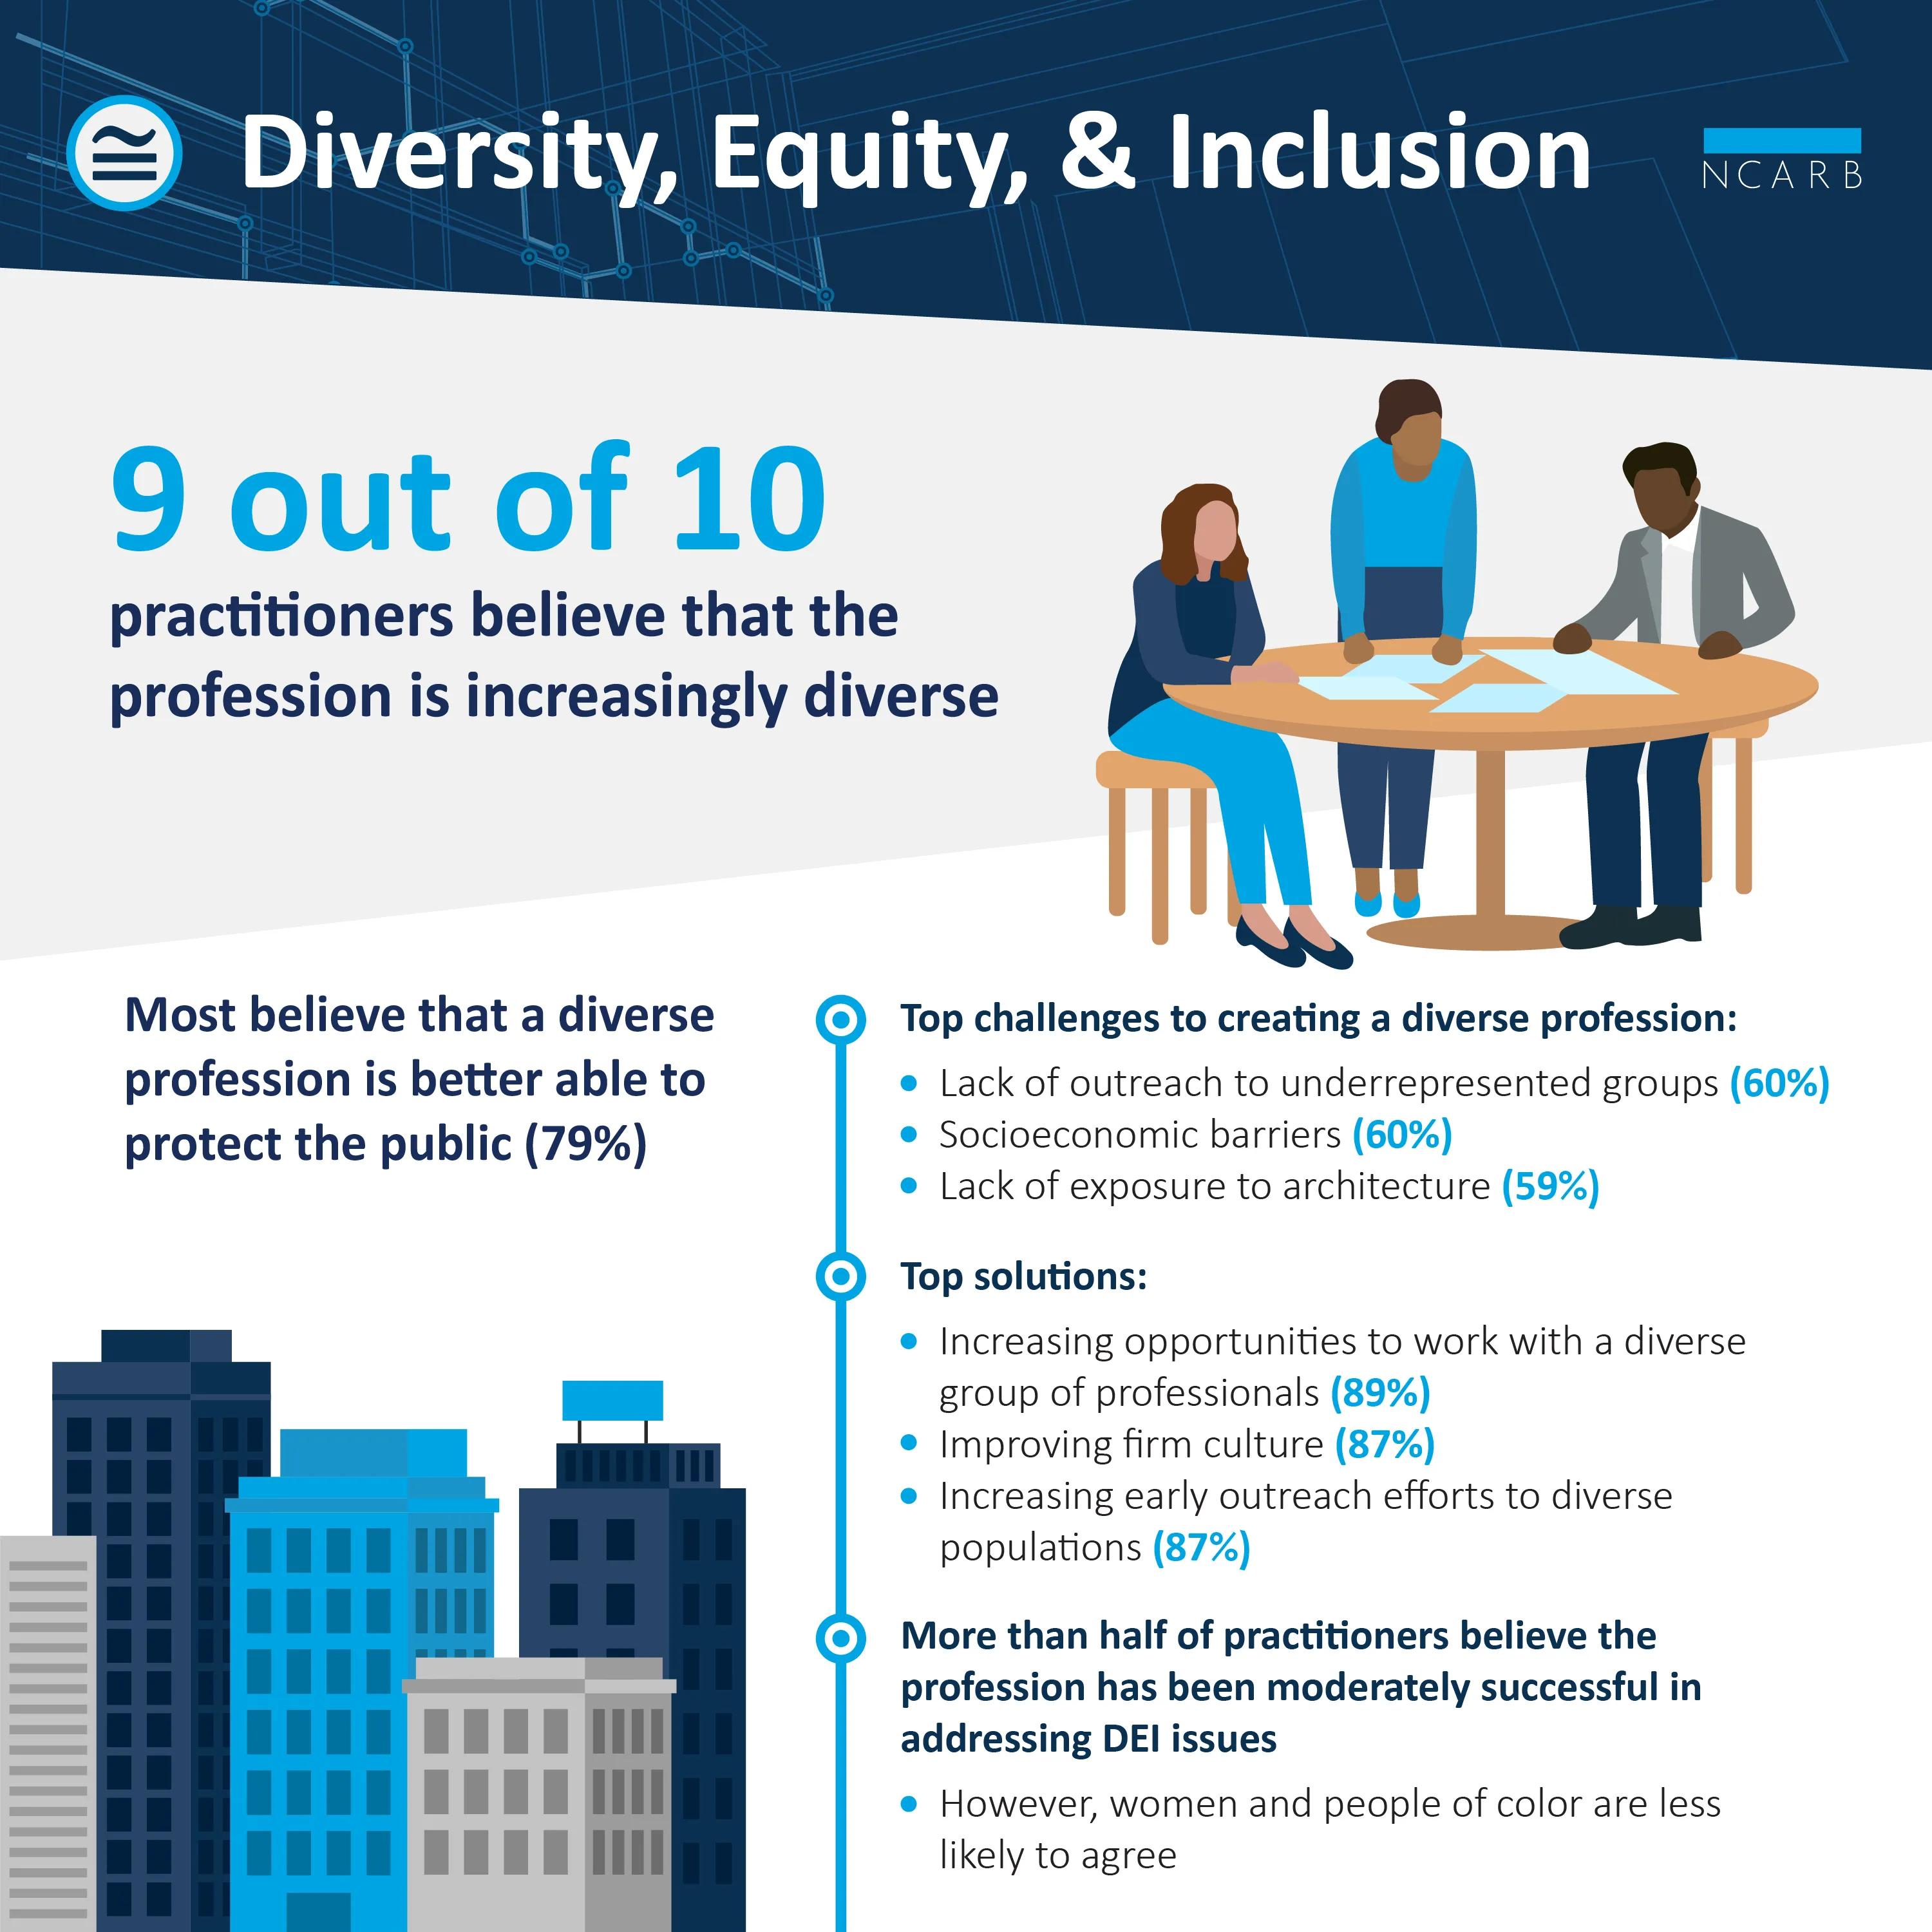 Women and people of color are less likely to think the profession is making significant DEI progress.